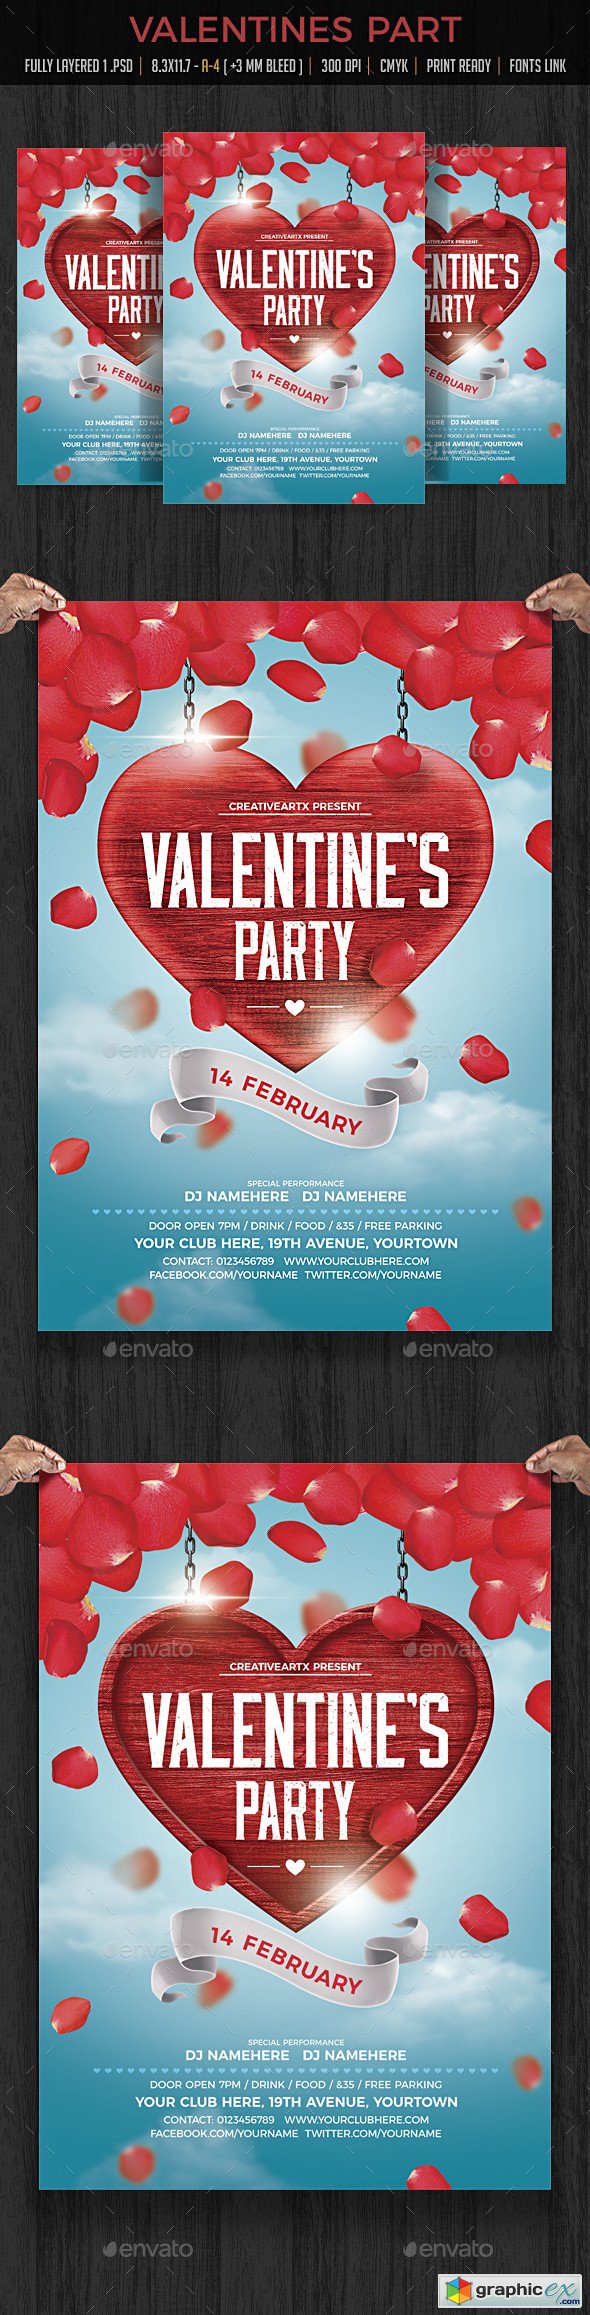 Valentines Party Flyer 19233659